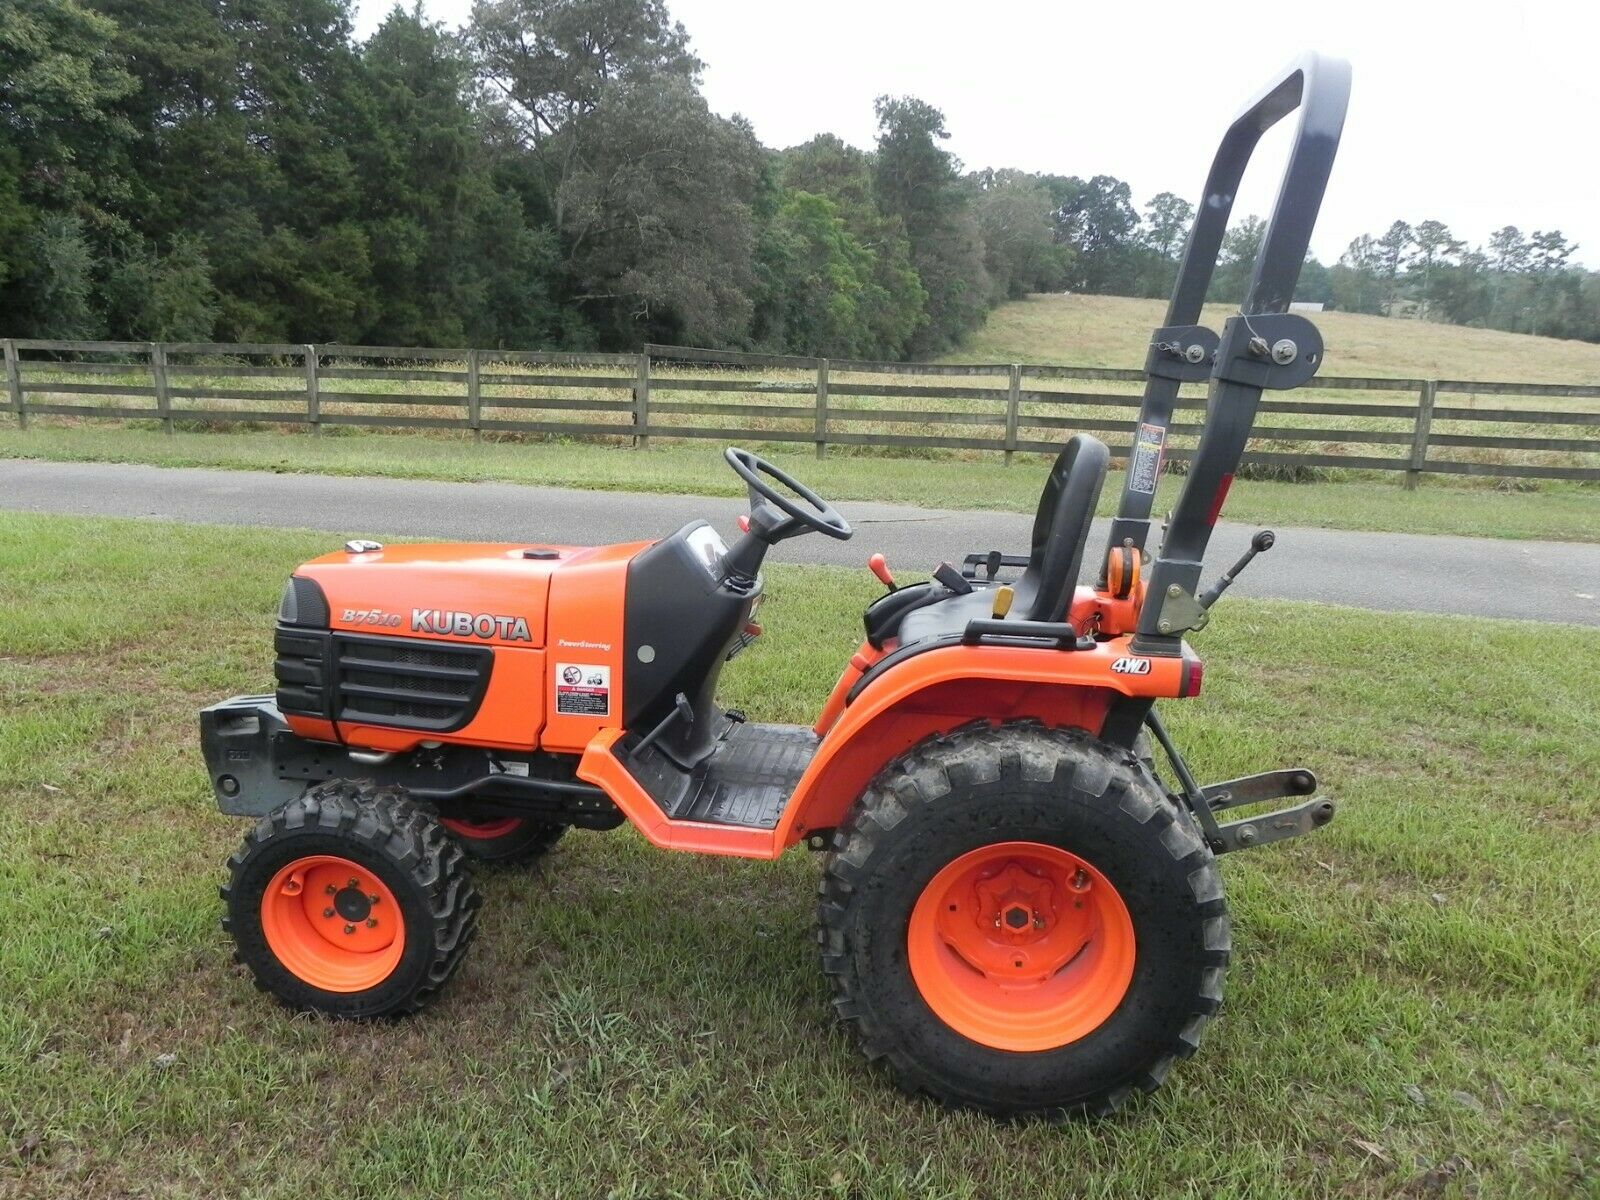 Kubota tractors for sale - persnow